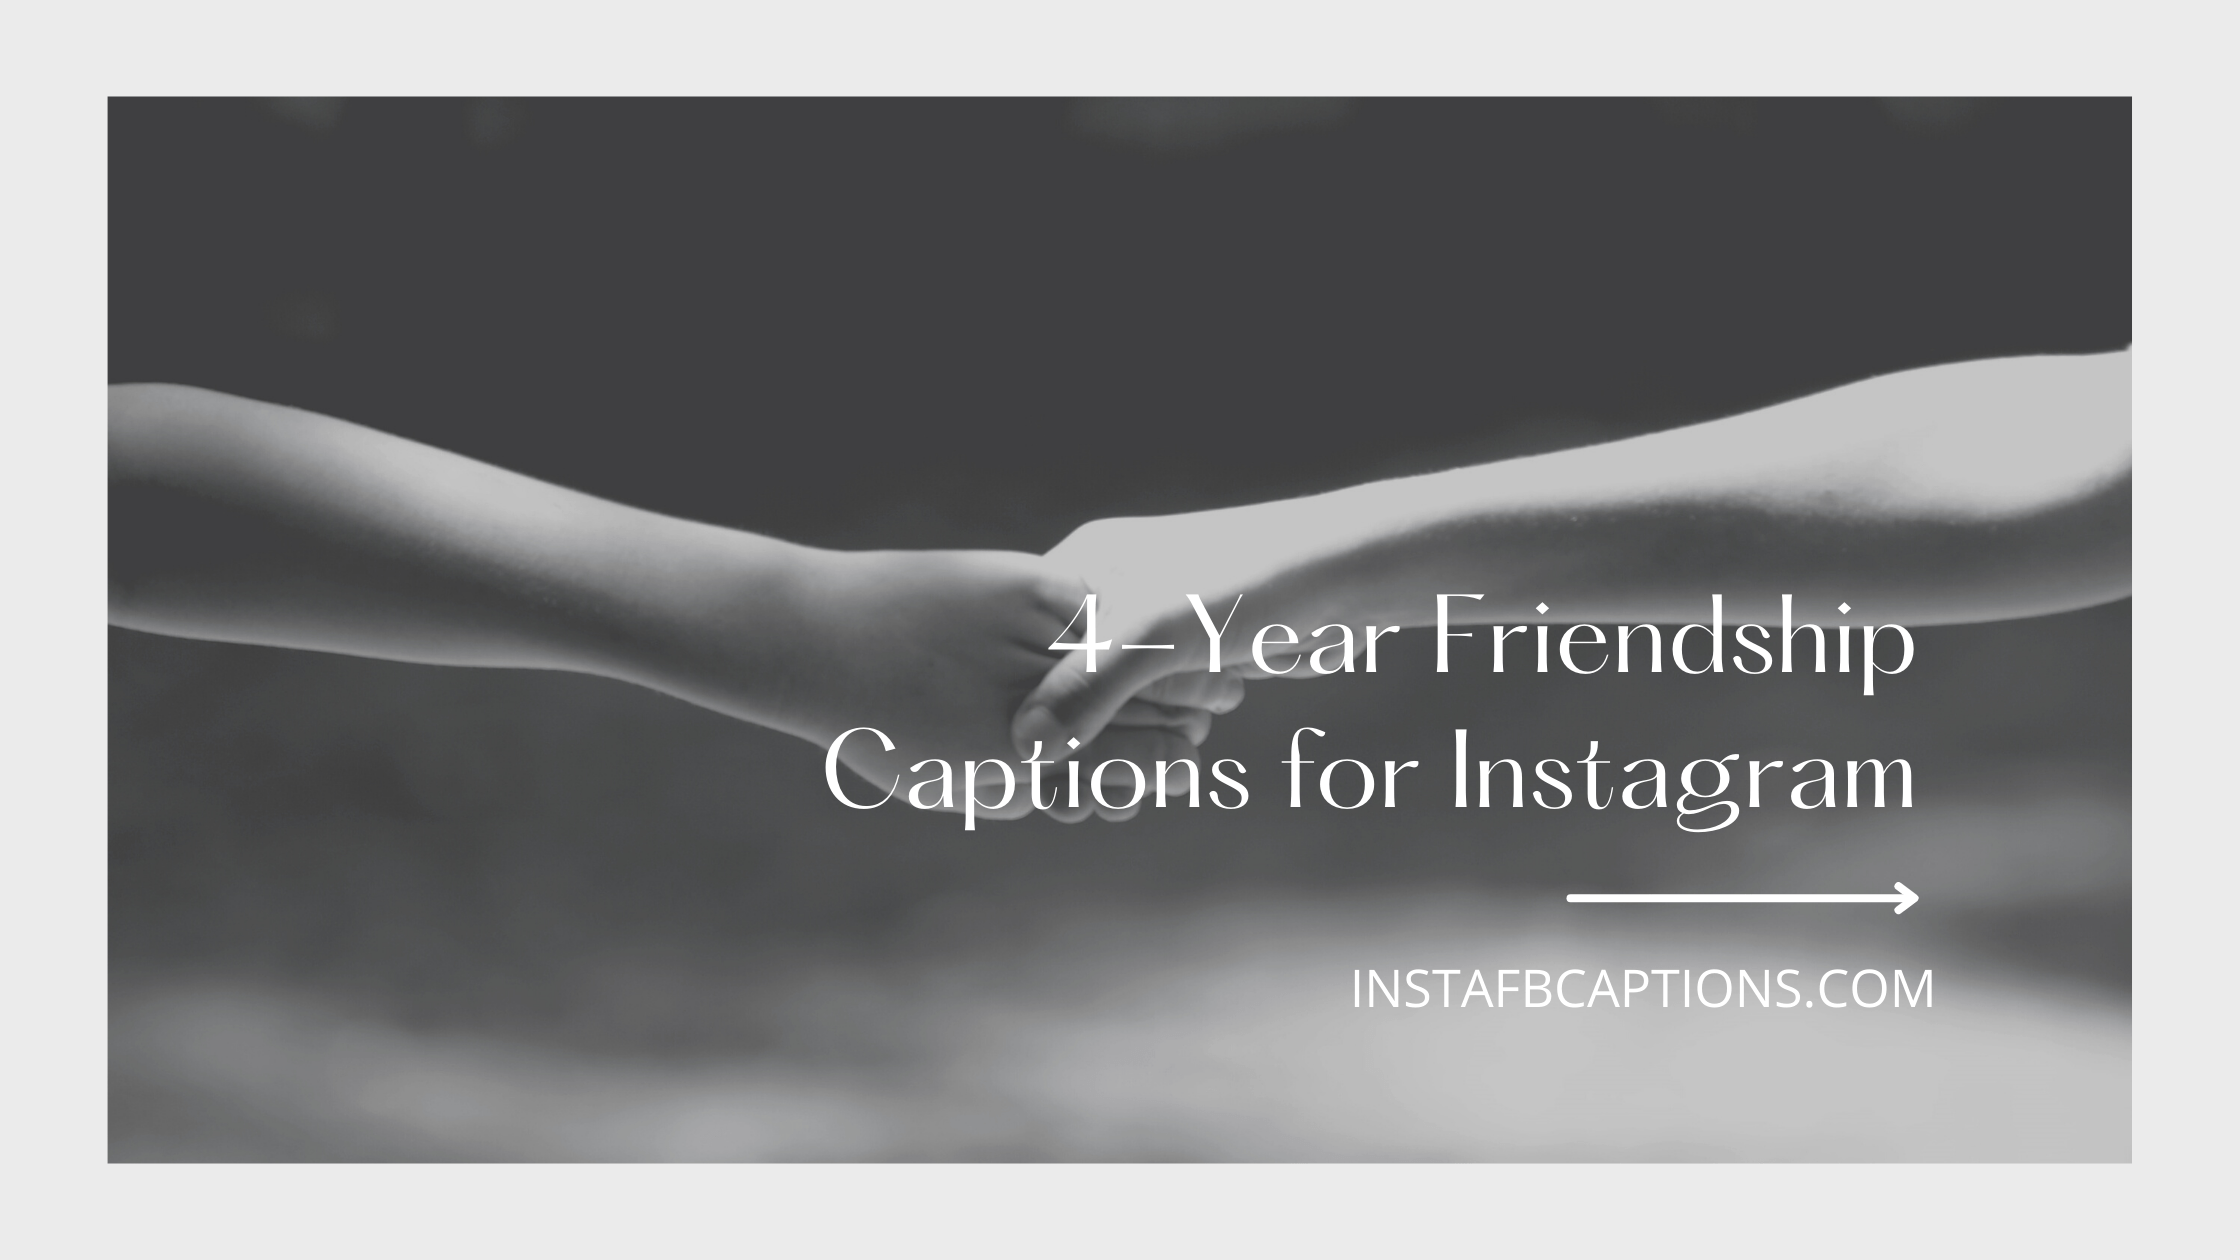 4 Year Friendship Captions For Instagram  - 4 Year Friendship Captions for Instagram - 4-Year Friendship Captions for Instagram in 2023